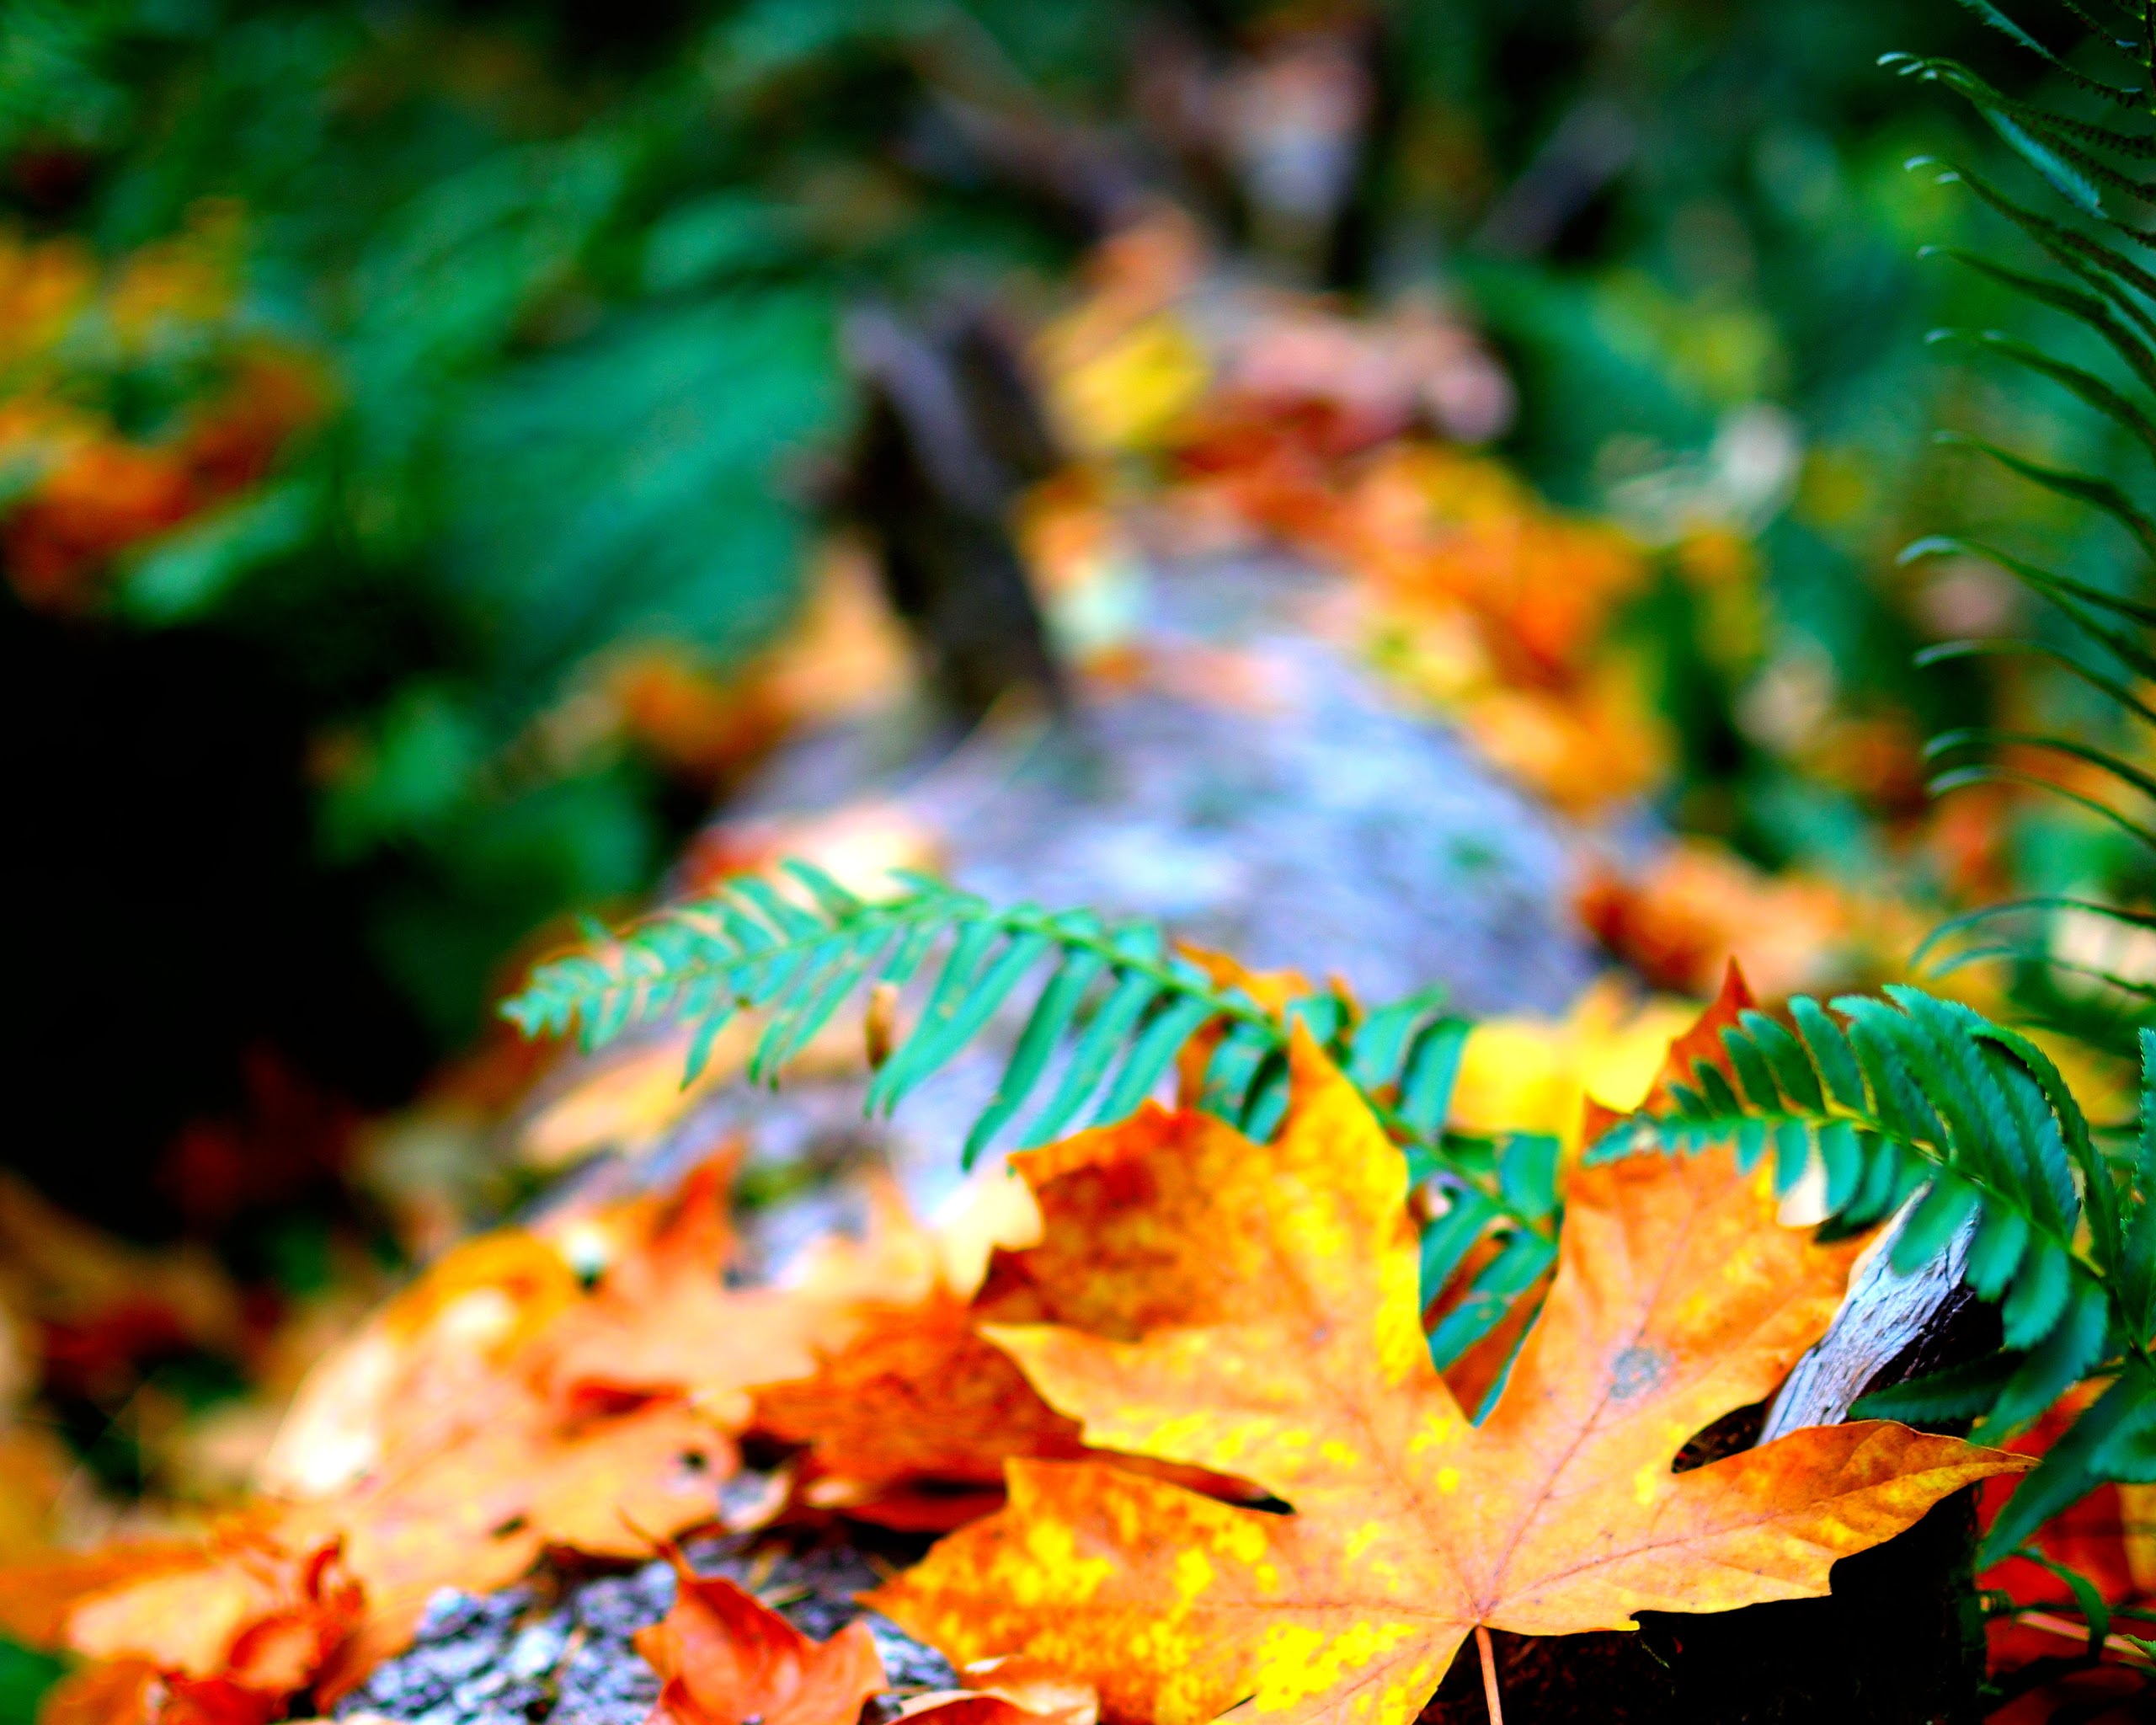 4k Wallpaper Autumn Leaves Blur Close Up Photo Of Dry - Hd Wallpapers 4k  Download For Mobile - 2560x2048 Wallpaper 